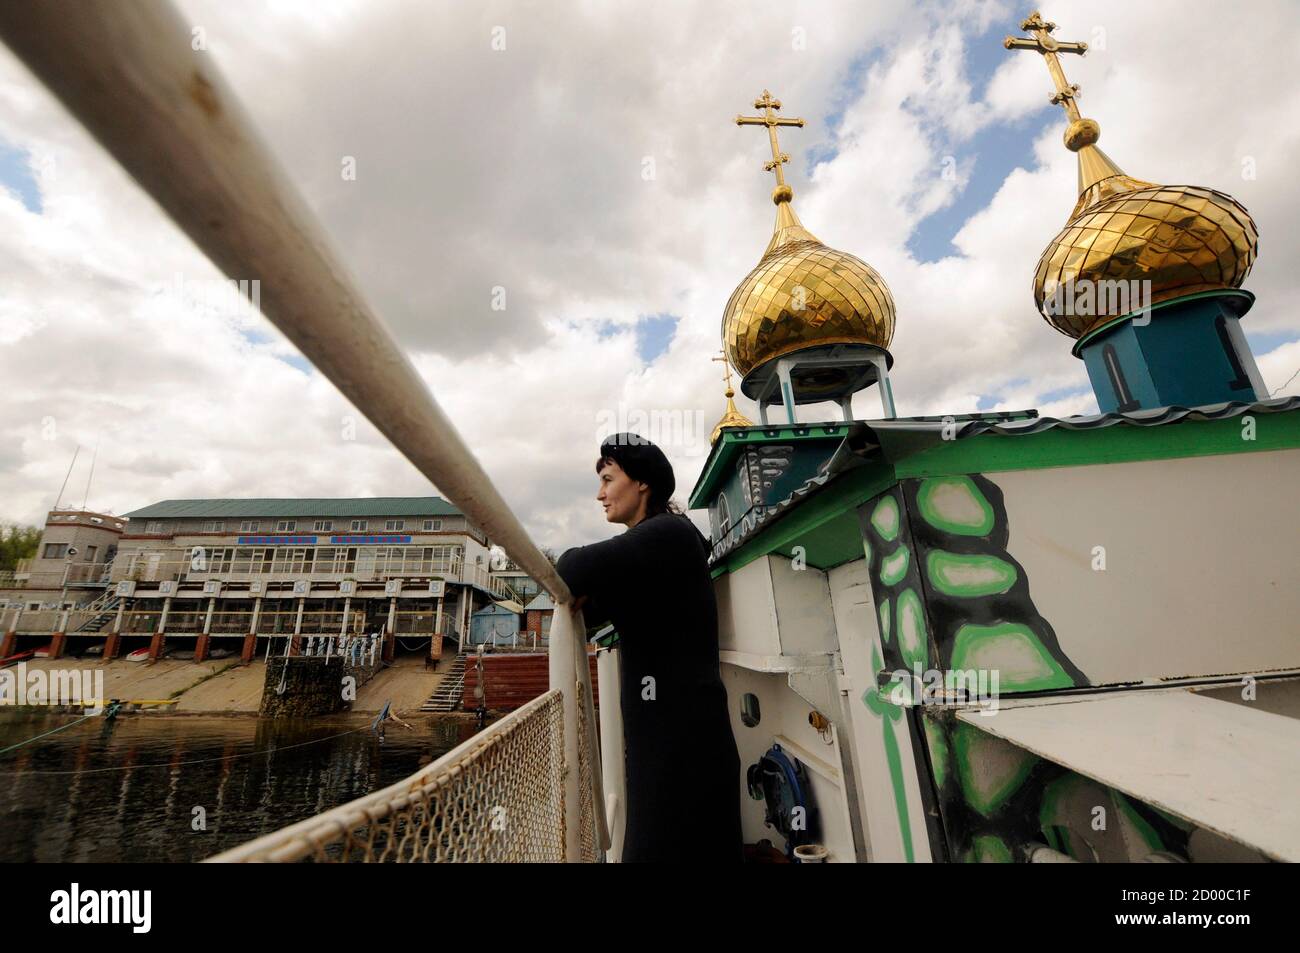 A woman stands onboard the Saint Vladimir floating Orthdox Christian temple tied up at a mooring on the Volga river in the southern city of Volgograd May 10, 2011. The self-propelled ship-temple which bears the full name 'Grand Prince St. Vladimir, Equal-to-the-Apostles' was reconstructed on the base of a landing ship and christened October 31, 2004, according to its builders.  REUTERS/Sergei Karpov  (RUSSIA - Tags: RELIGION SOCIETY ODDLY TRANSPORT) Stock Photo